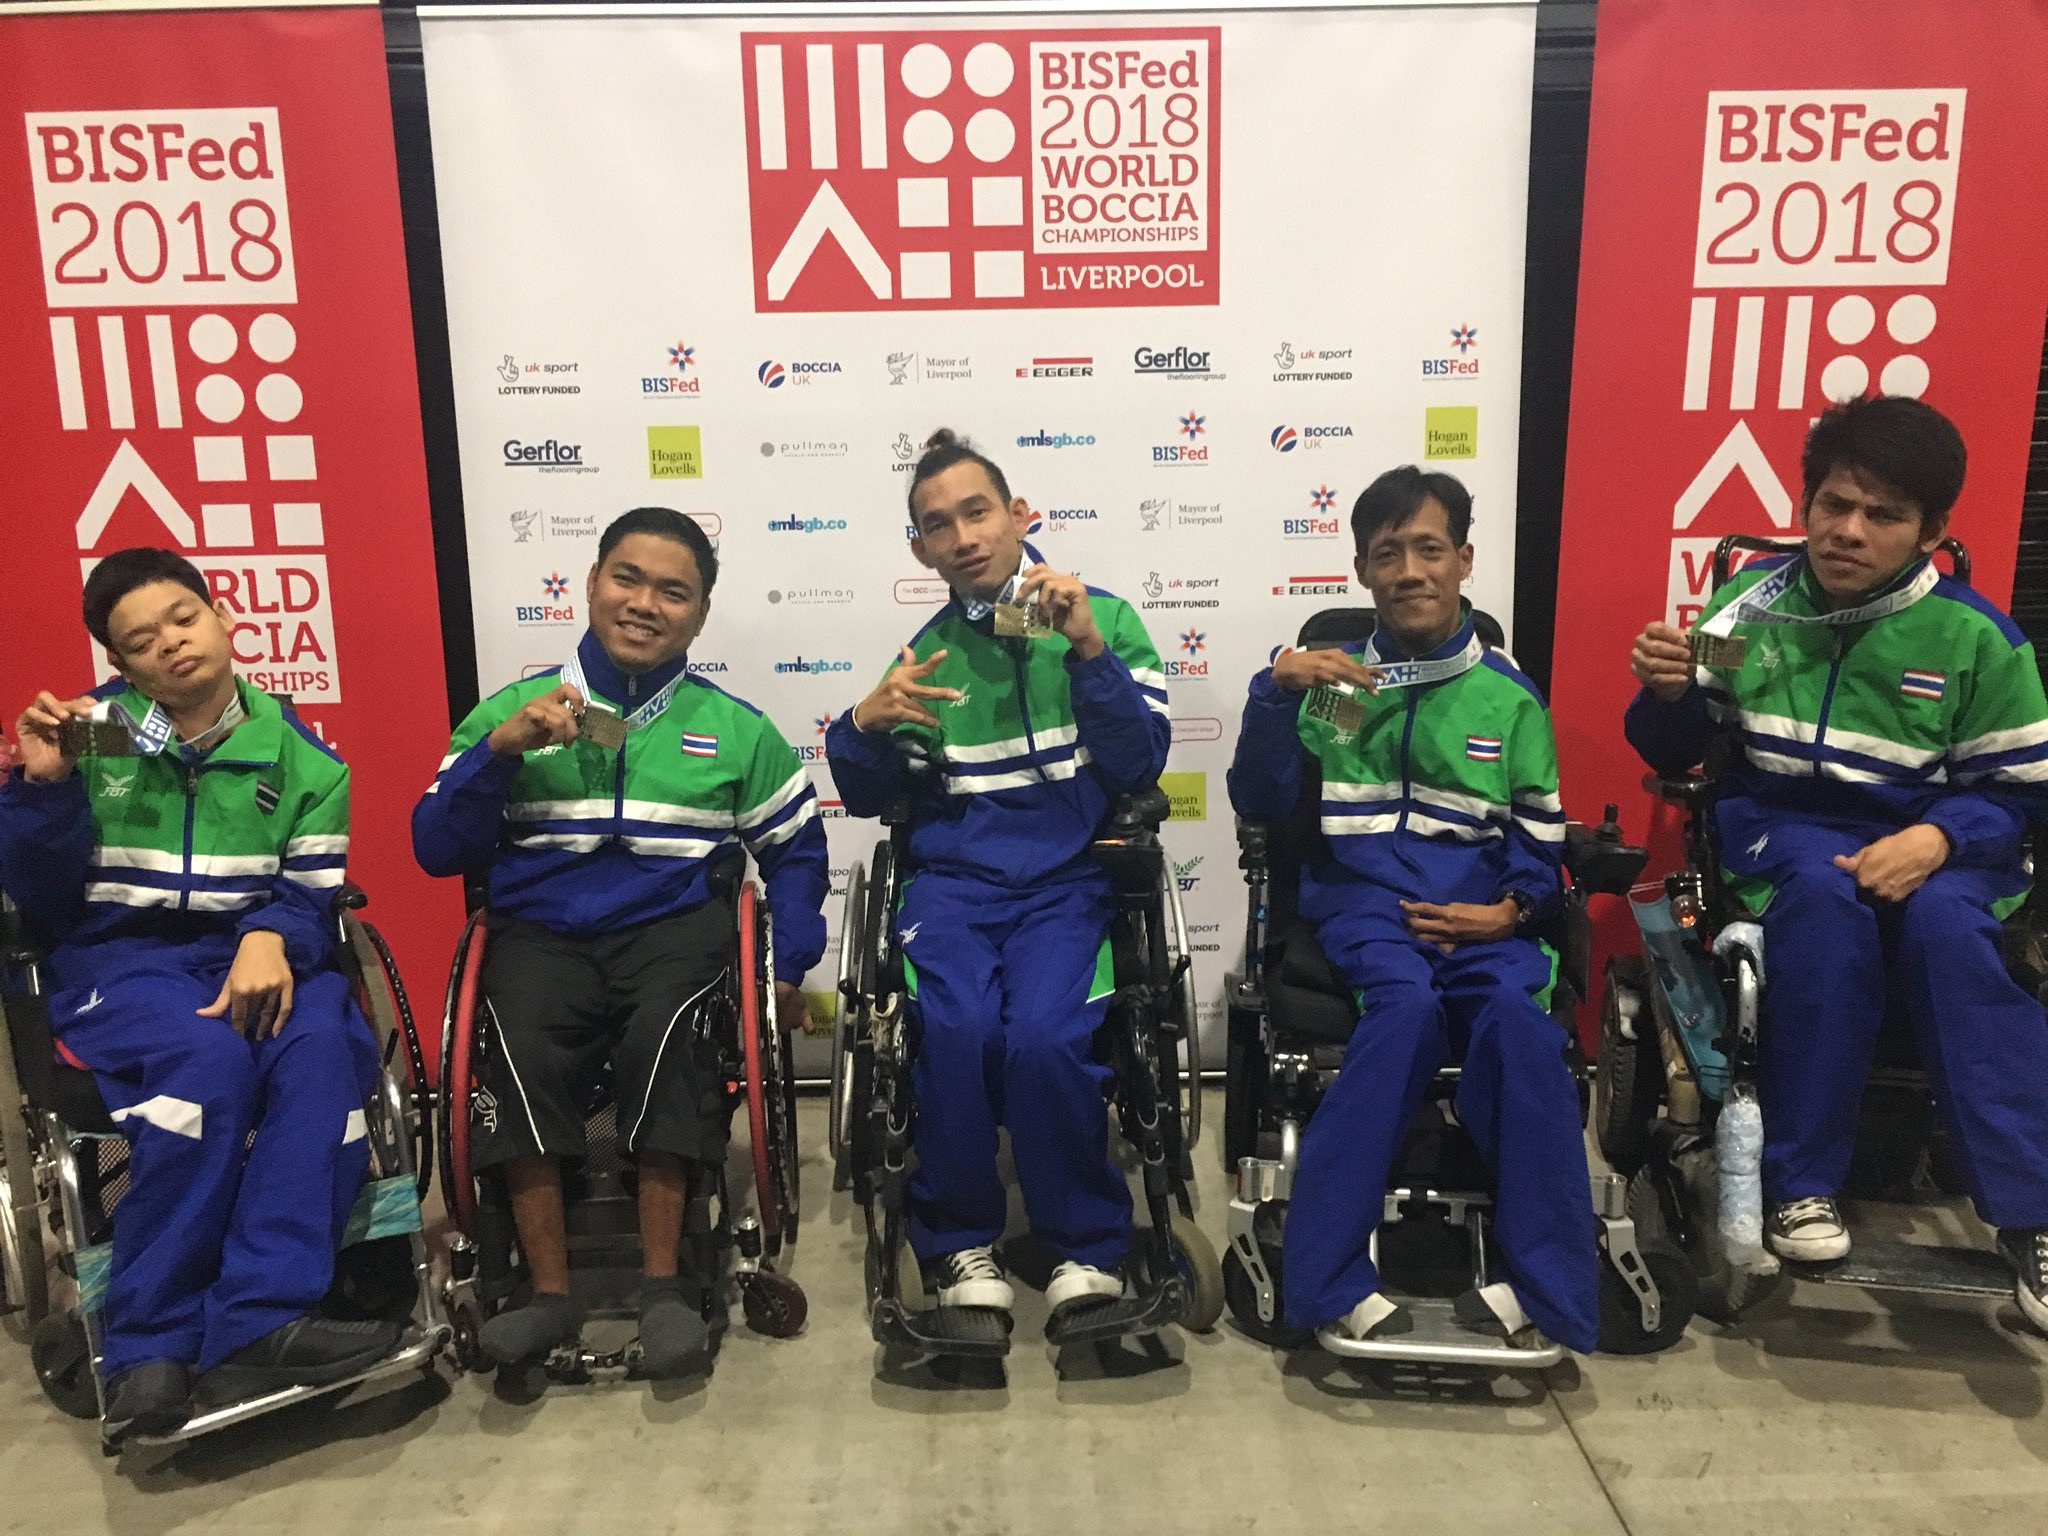 Boccia rankings released after 2018 World Championships